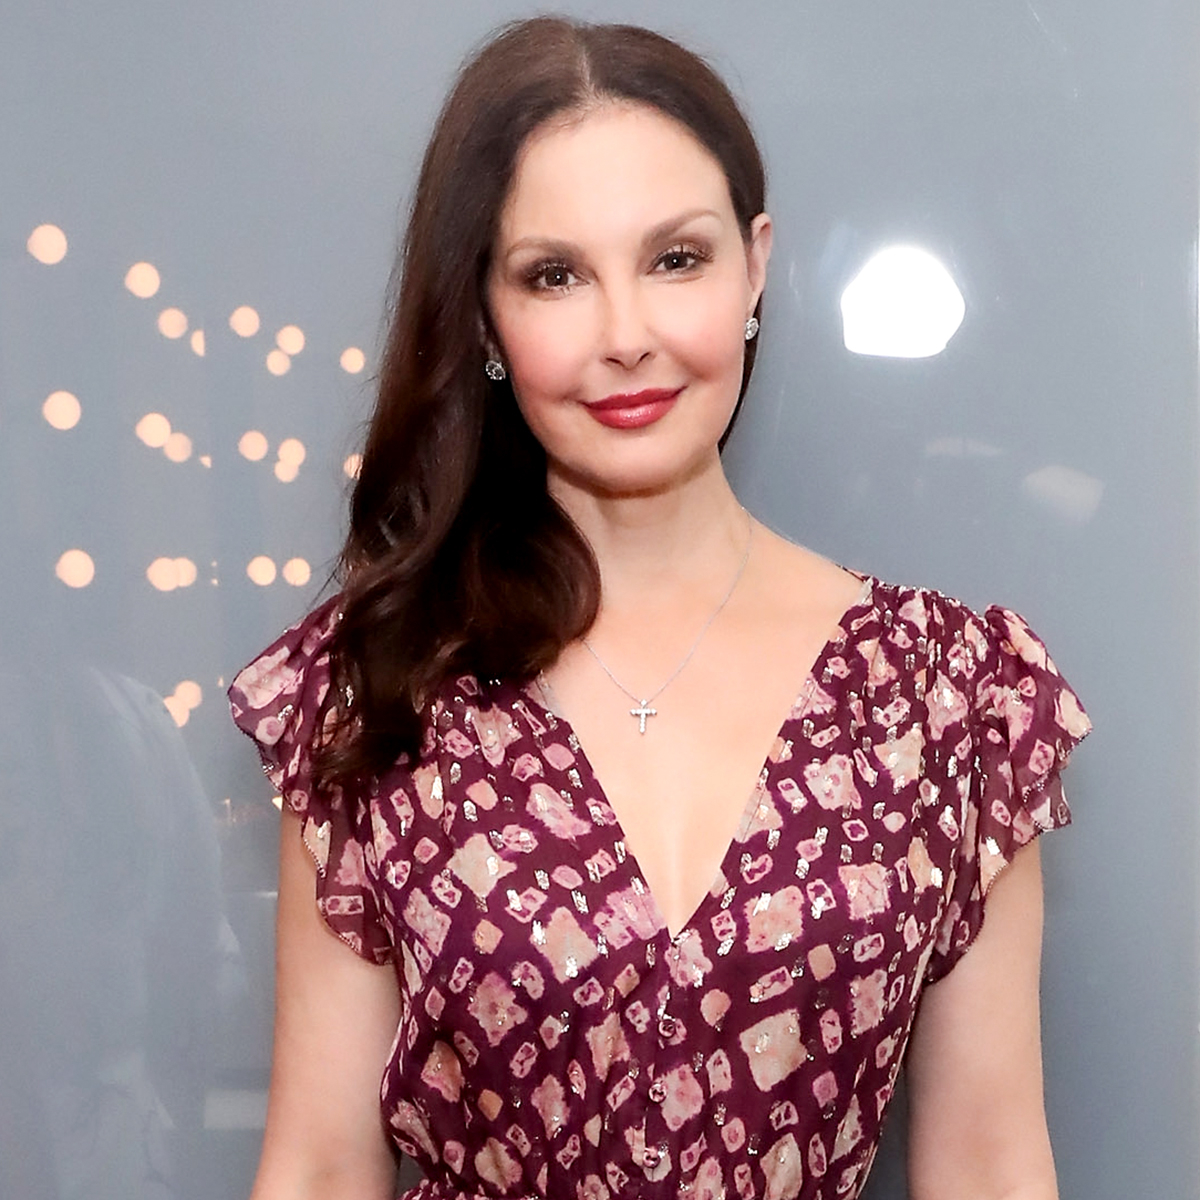 Ashley Judd is hospitalized after suffering a “catastrophic” injury